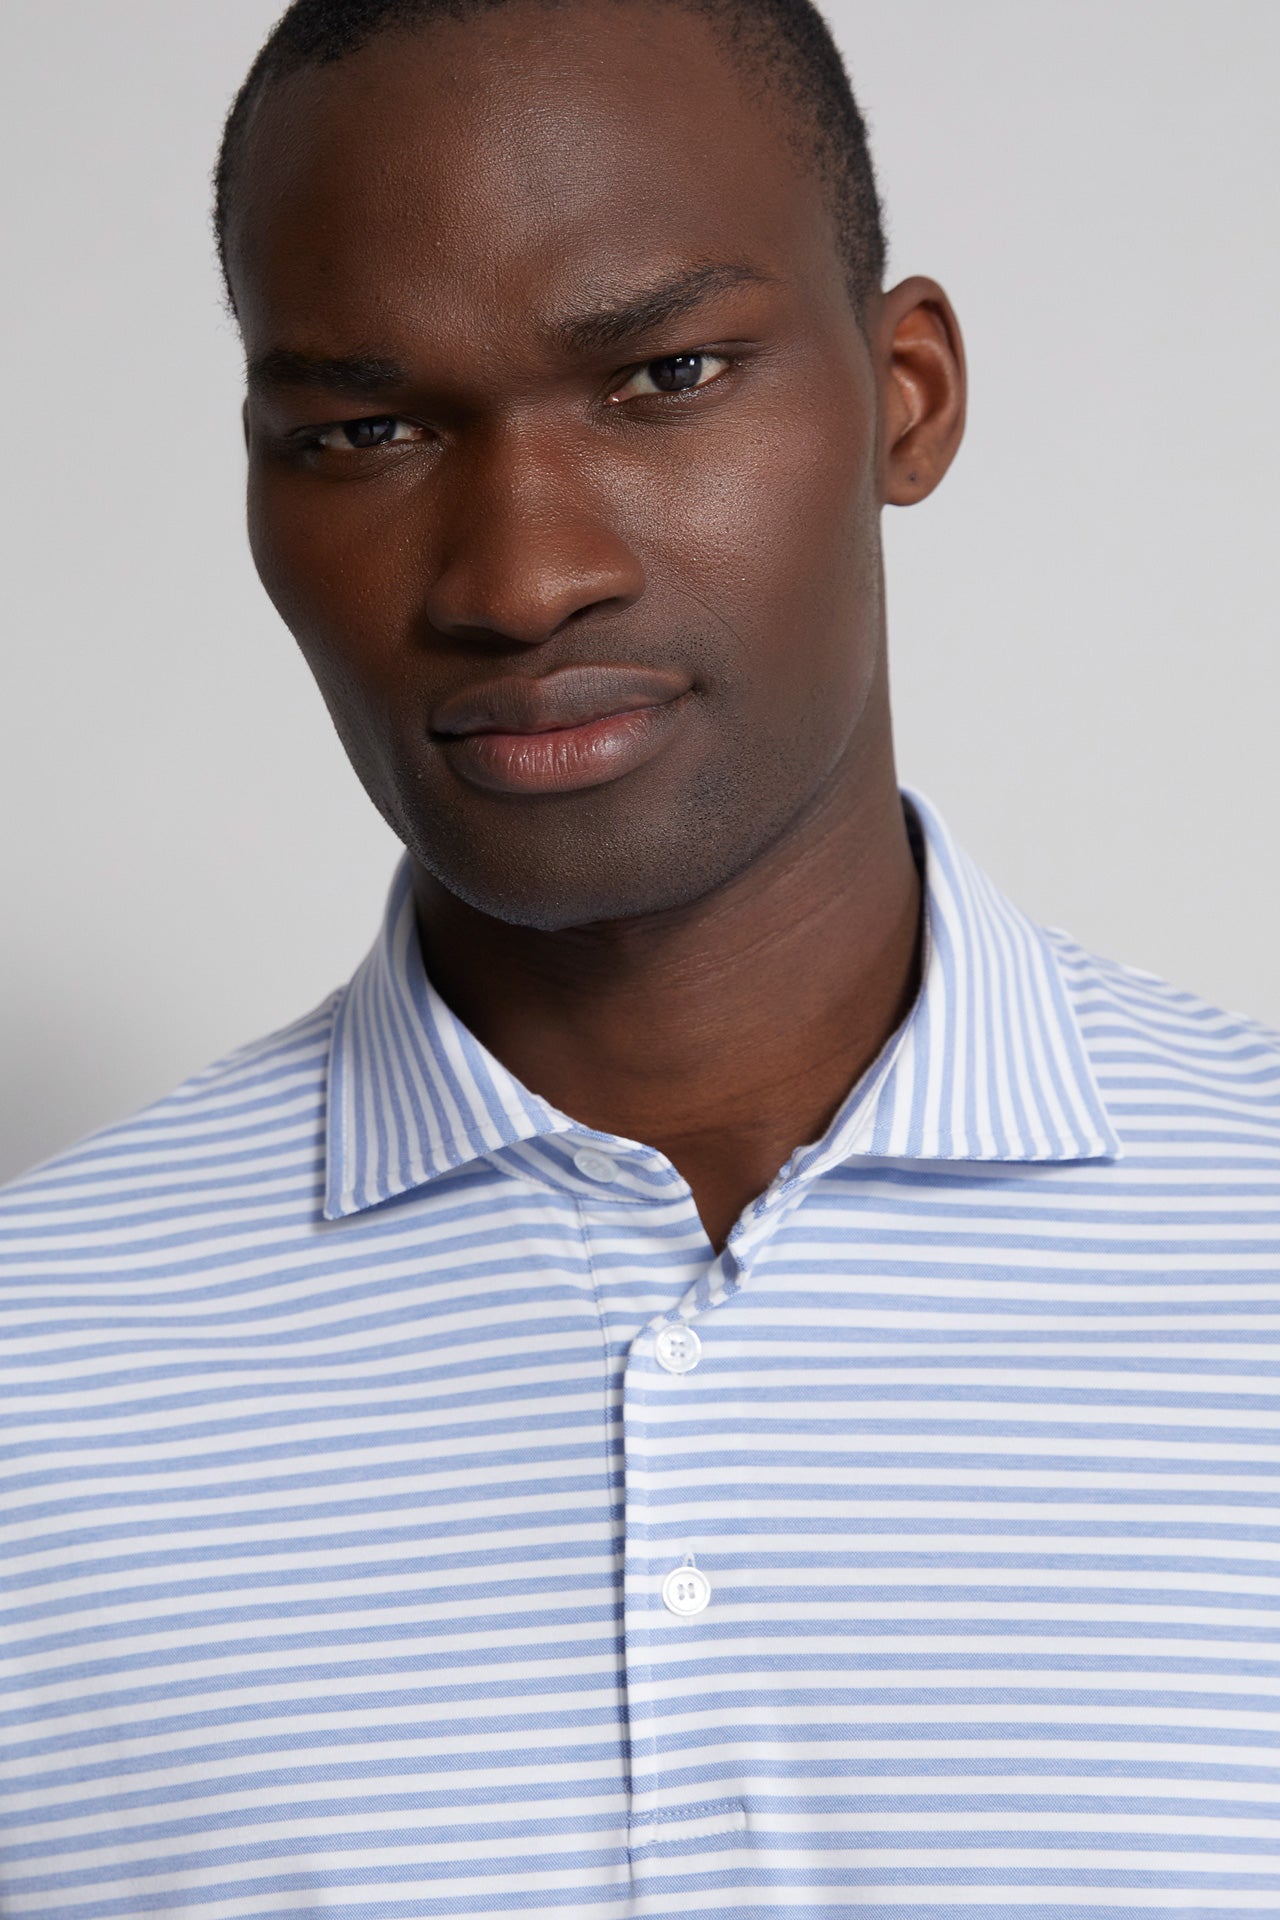 men's striped polo t-shirt blue and white - neck detail